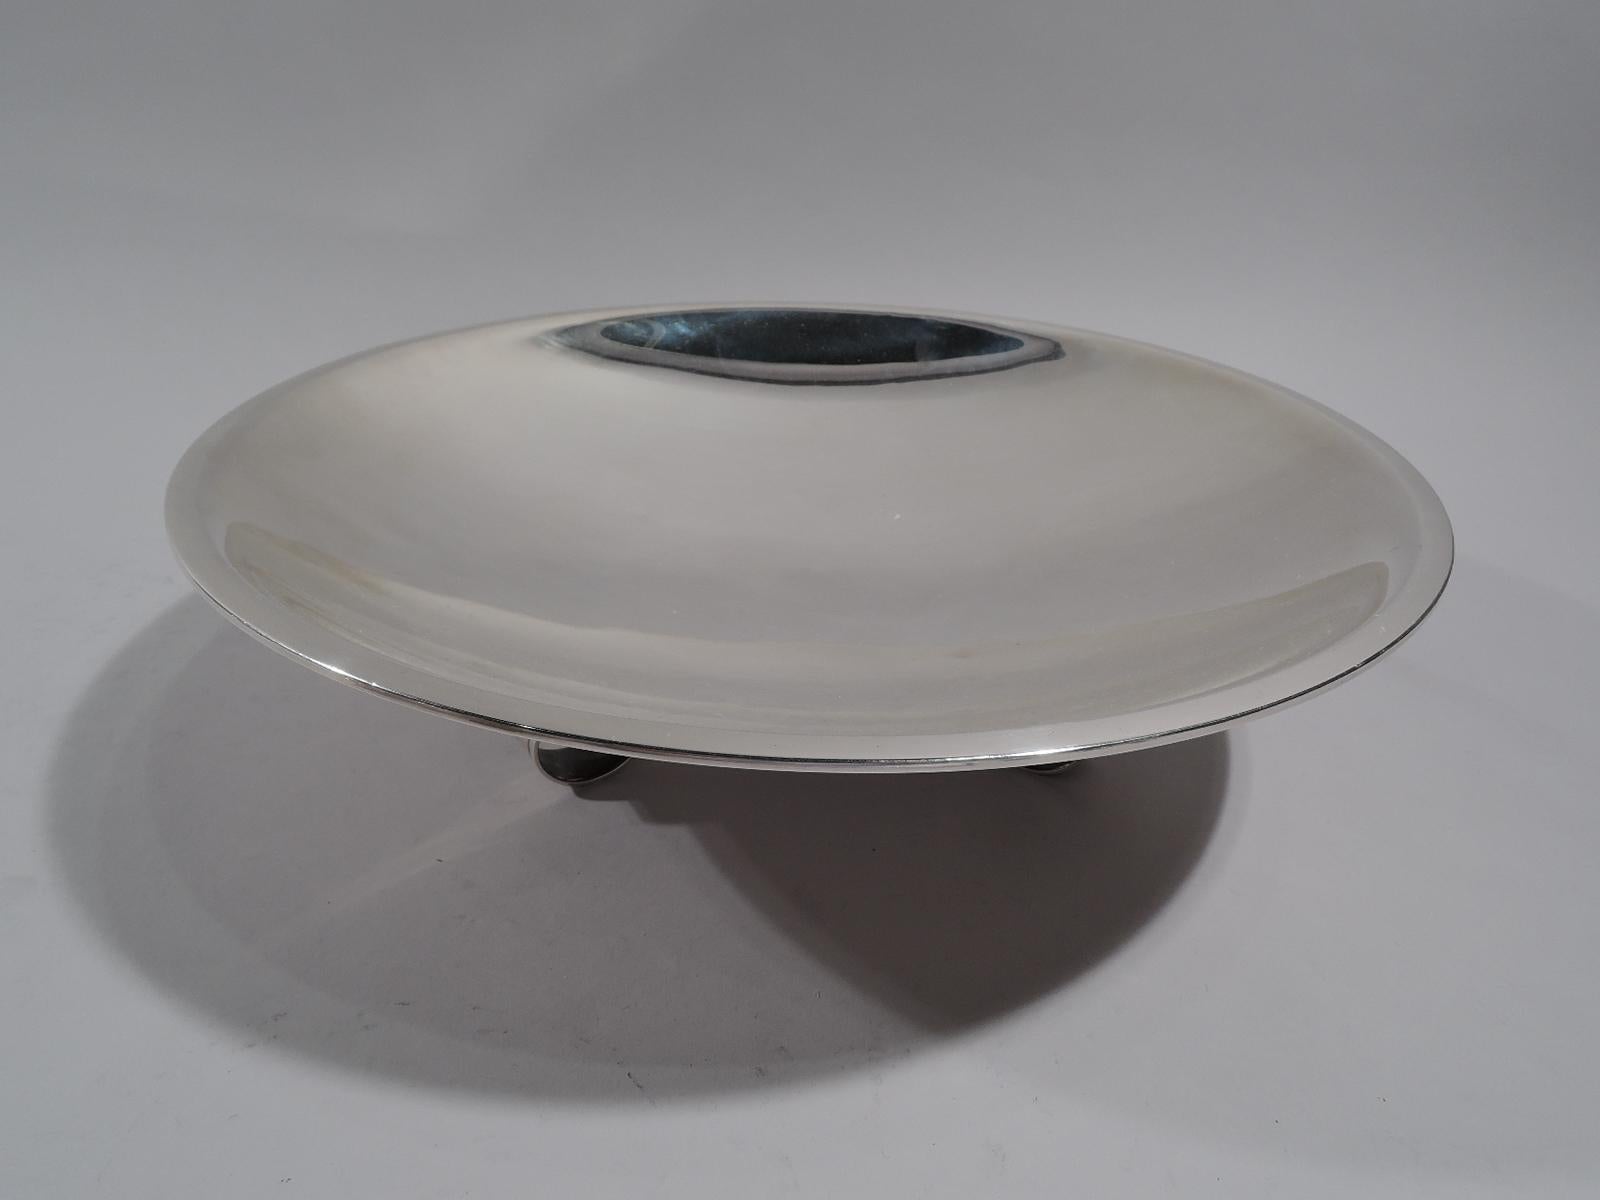 Modern Classical sterling silver centerpiece bowl. Made by Tiffany & Co. in New York. Round and shallow with flat rim. Three s-scroll and bead supports. Fully marked including pattern no. 23228 (first produced in 1946) and director’s letter M